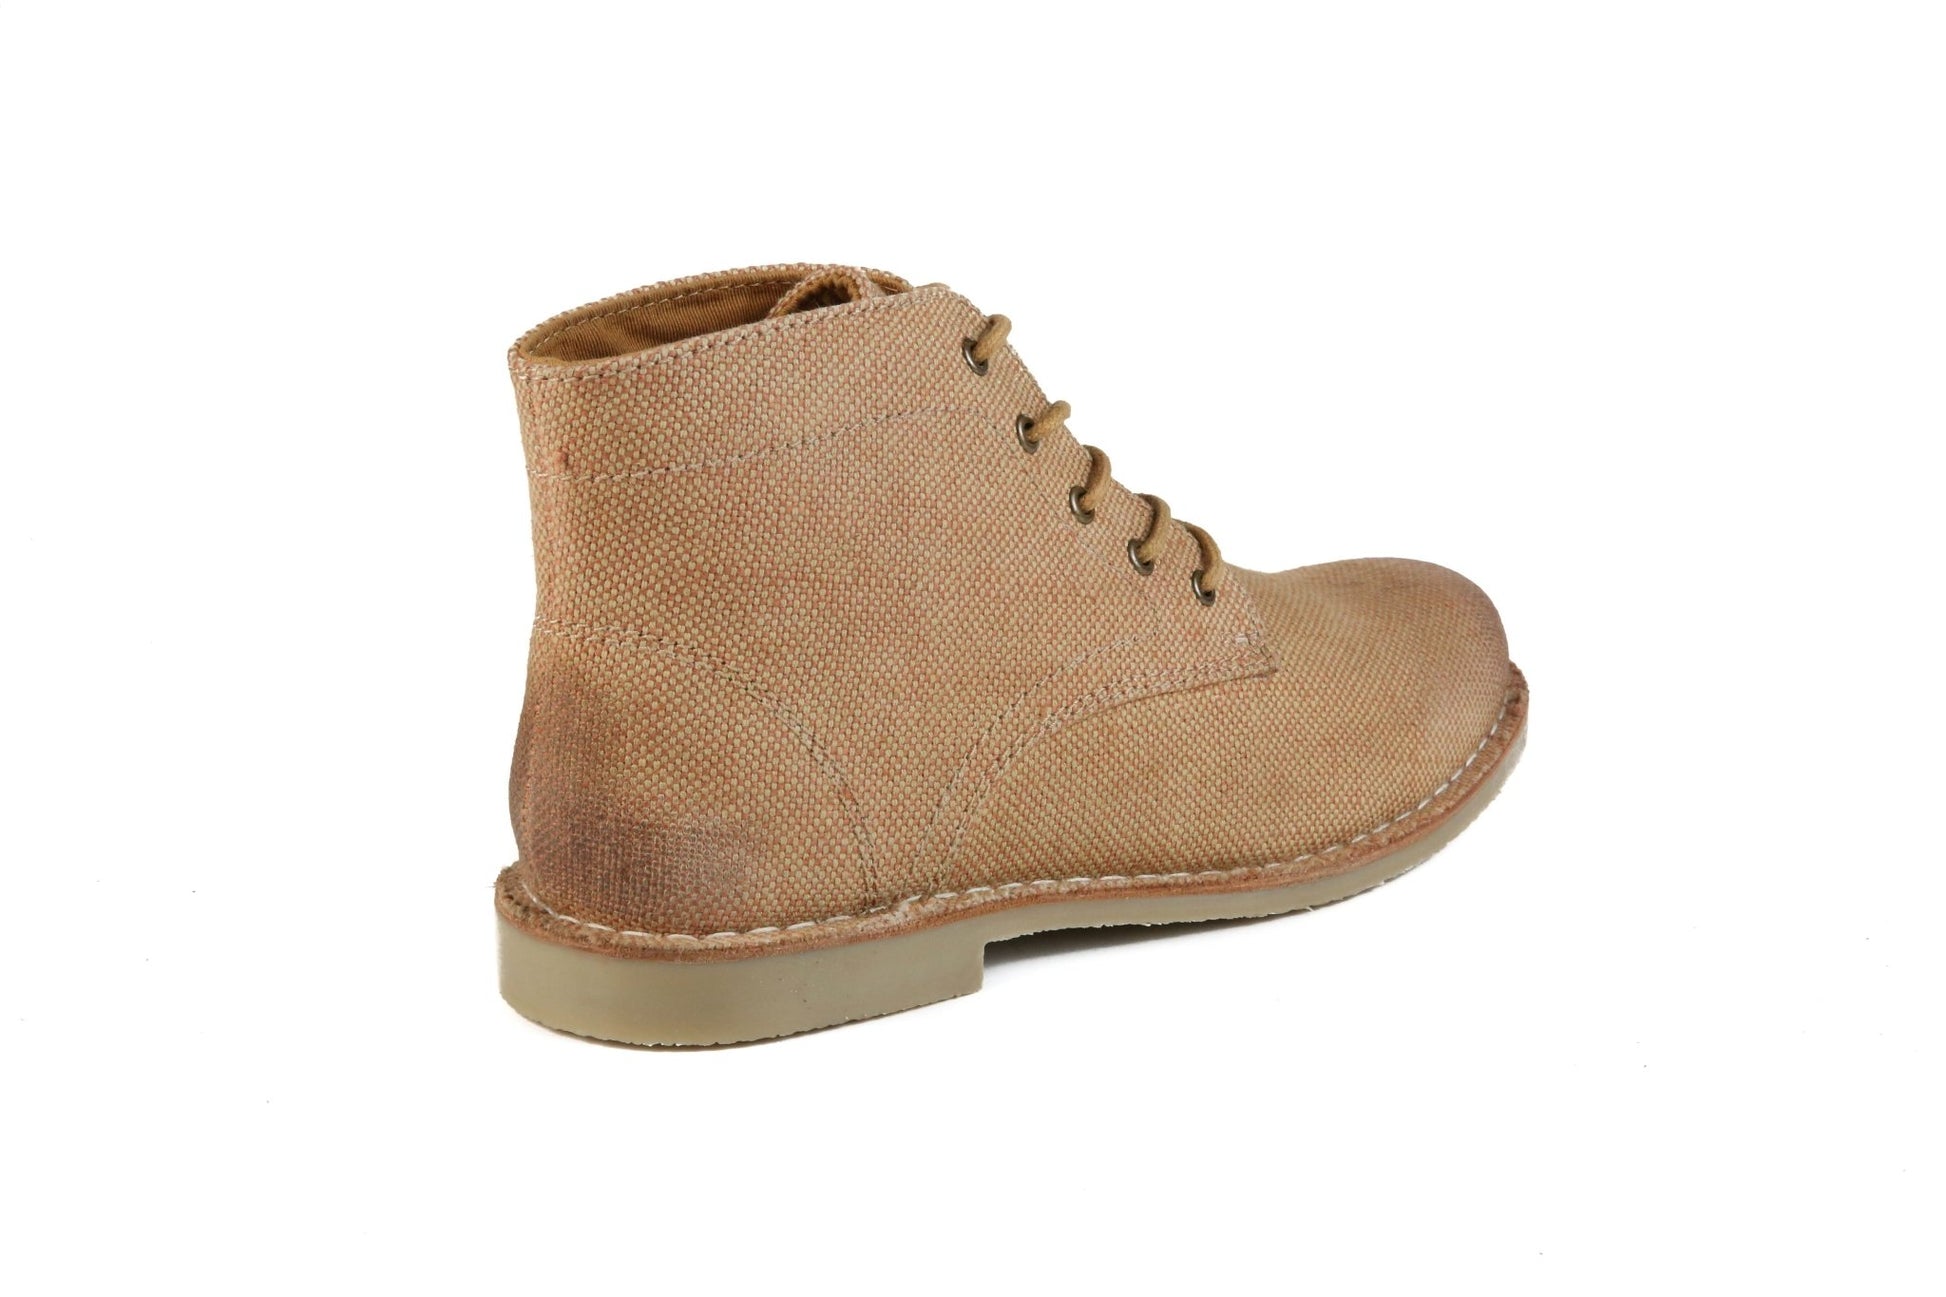 Hound & Hammer The Grover-Vegan | Men's SandStone Ankle Boots - Men - Footwear - Boots - Ankle Boots - Benn~Burry